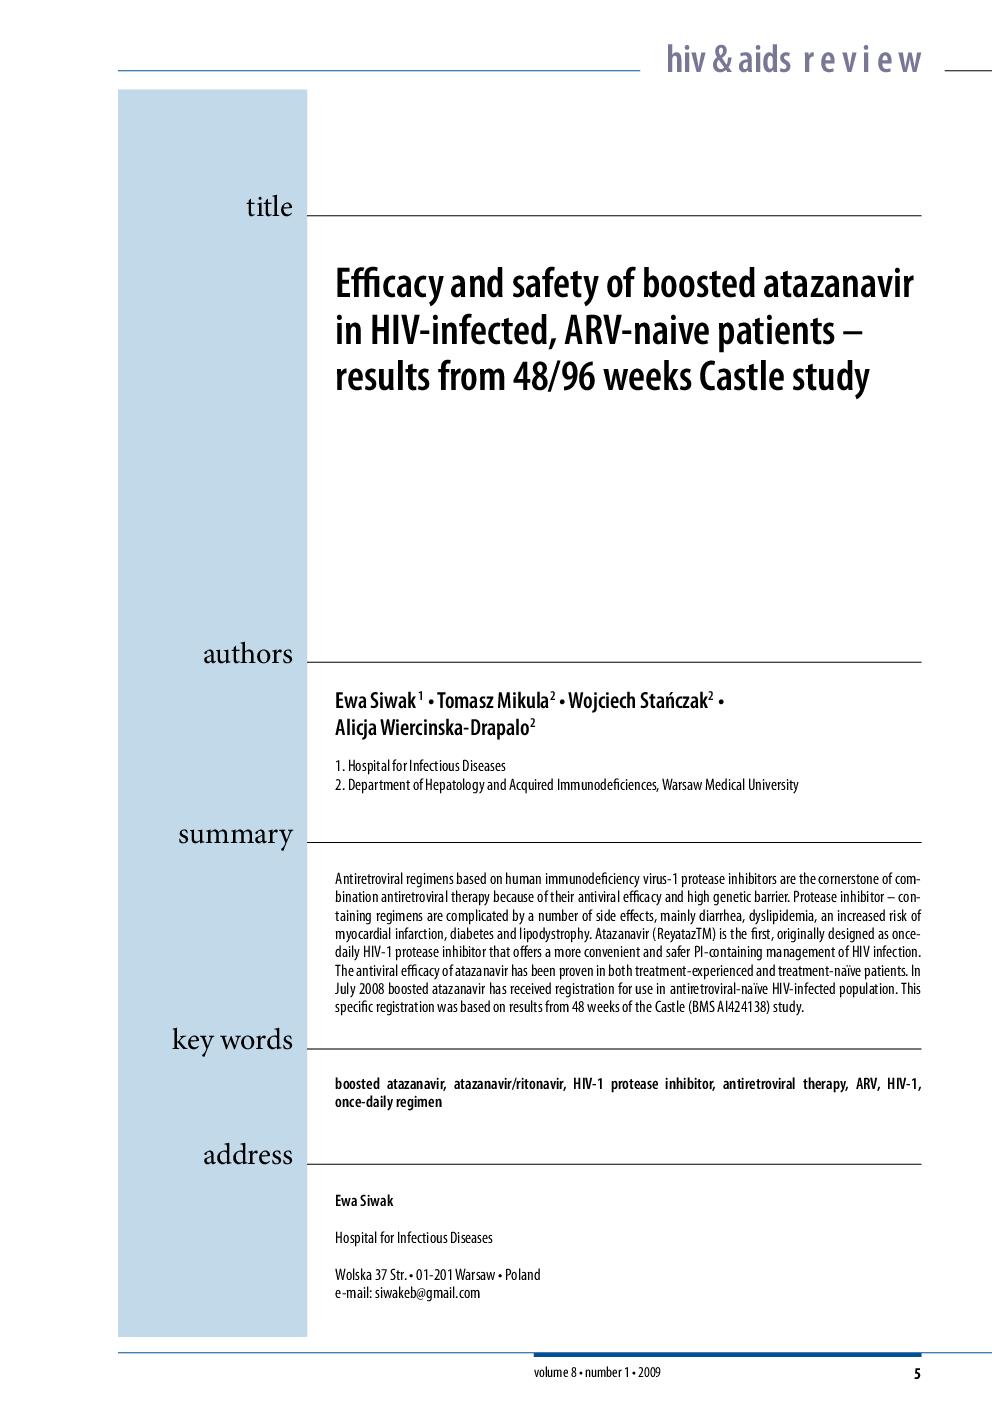 Efficacy and safety of boosted atazanavir in HIV-infected, ARV-naive patients - results from 48/96 weeks Castle study